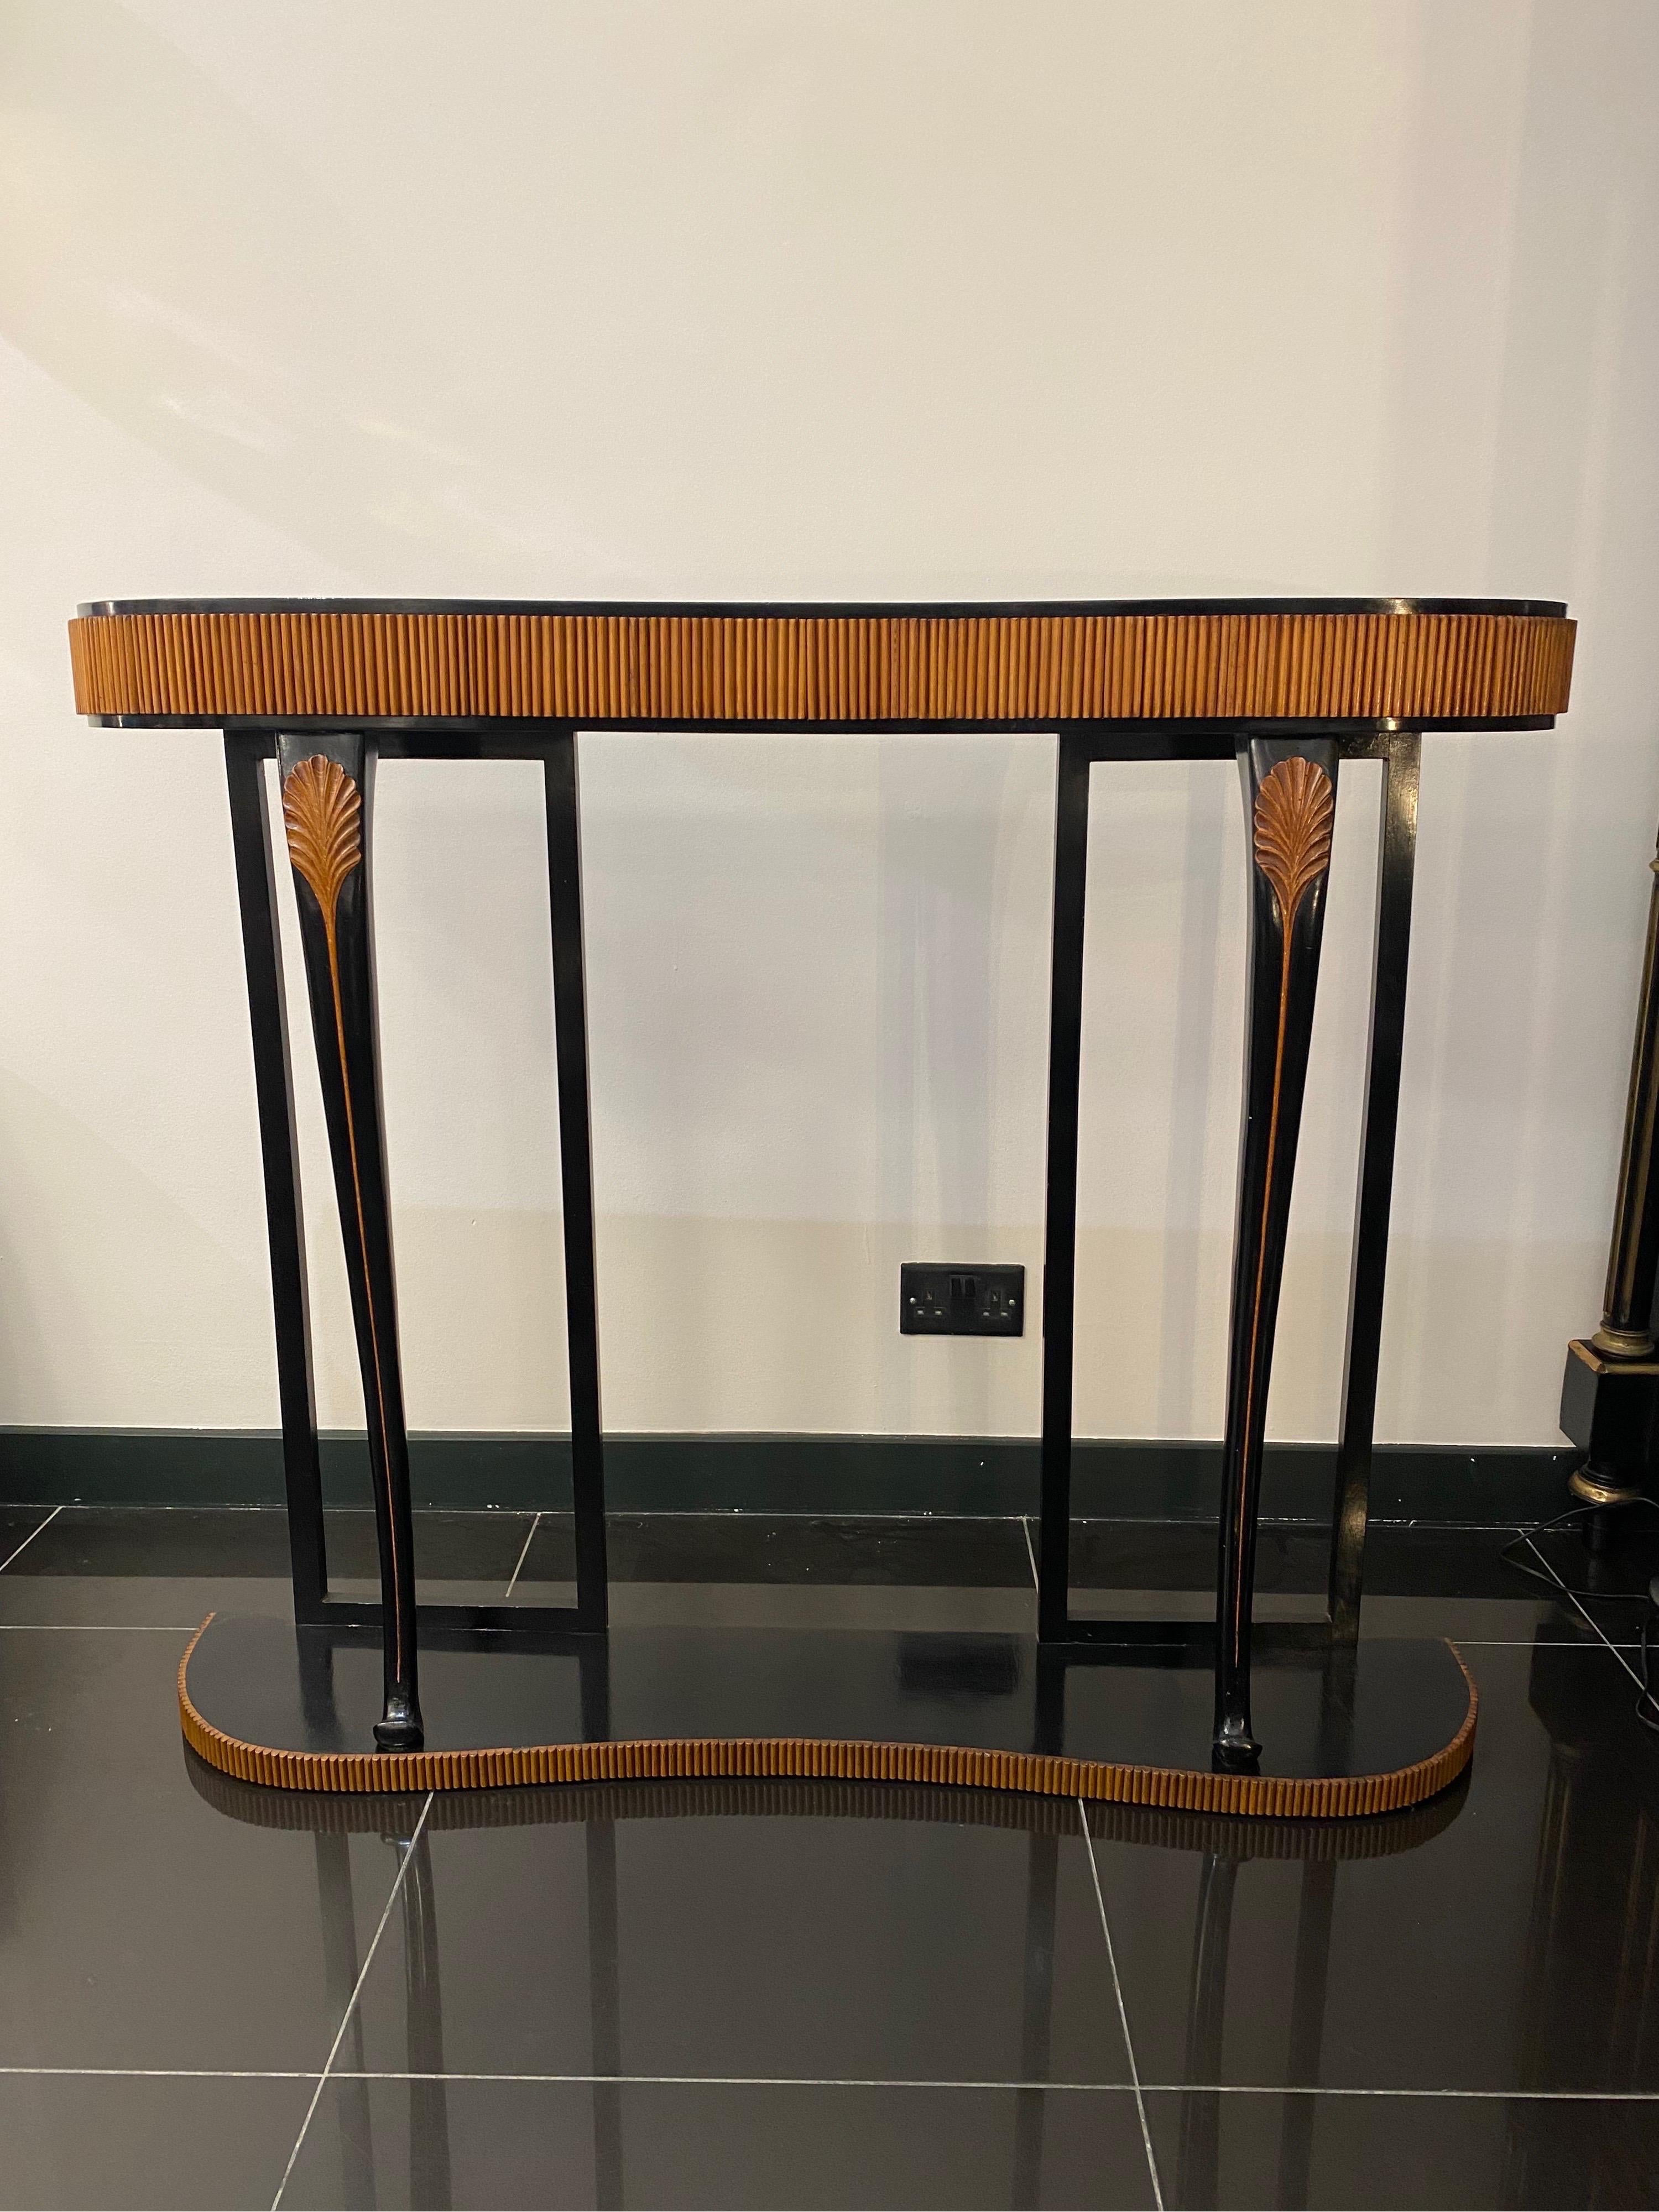 Delightful black lacquer and reeded cherry wood freestanding console table with four secret drawers. The console features two decorative curved legs to the front with carved leaf detailing supported by a kidney shaped stand matching the upper part.